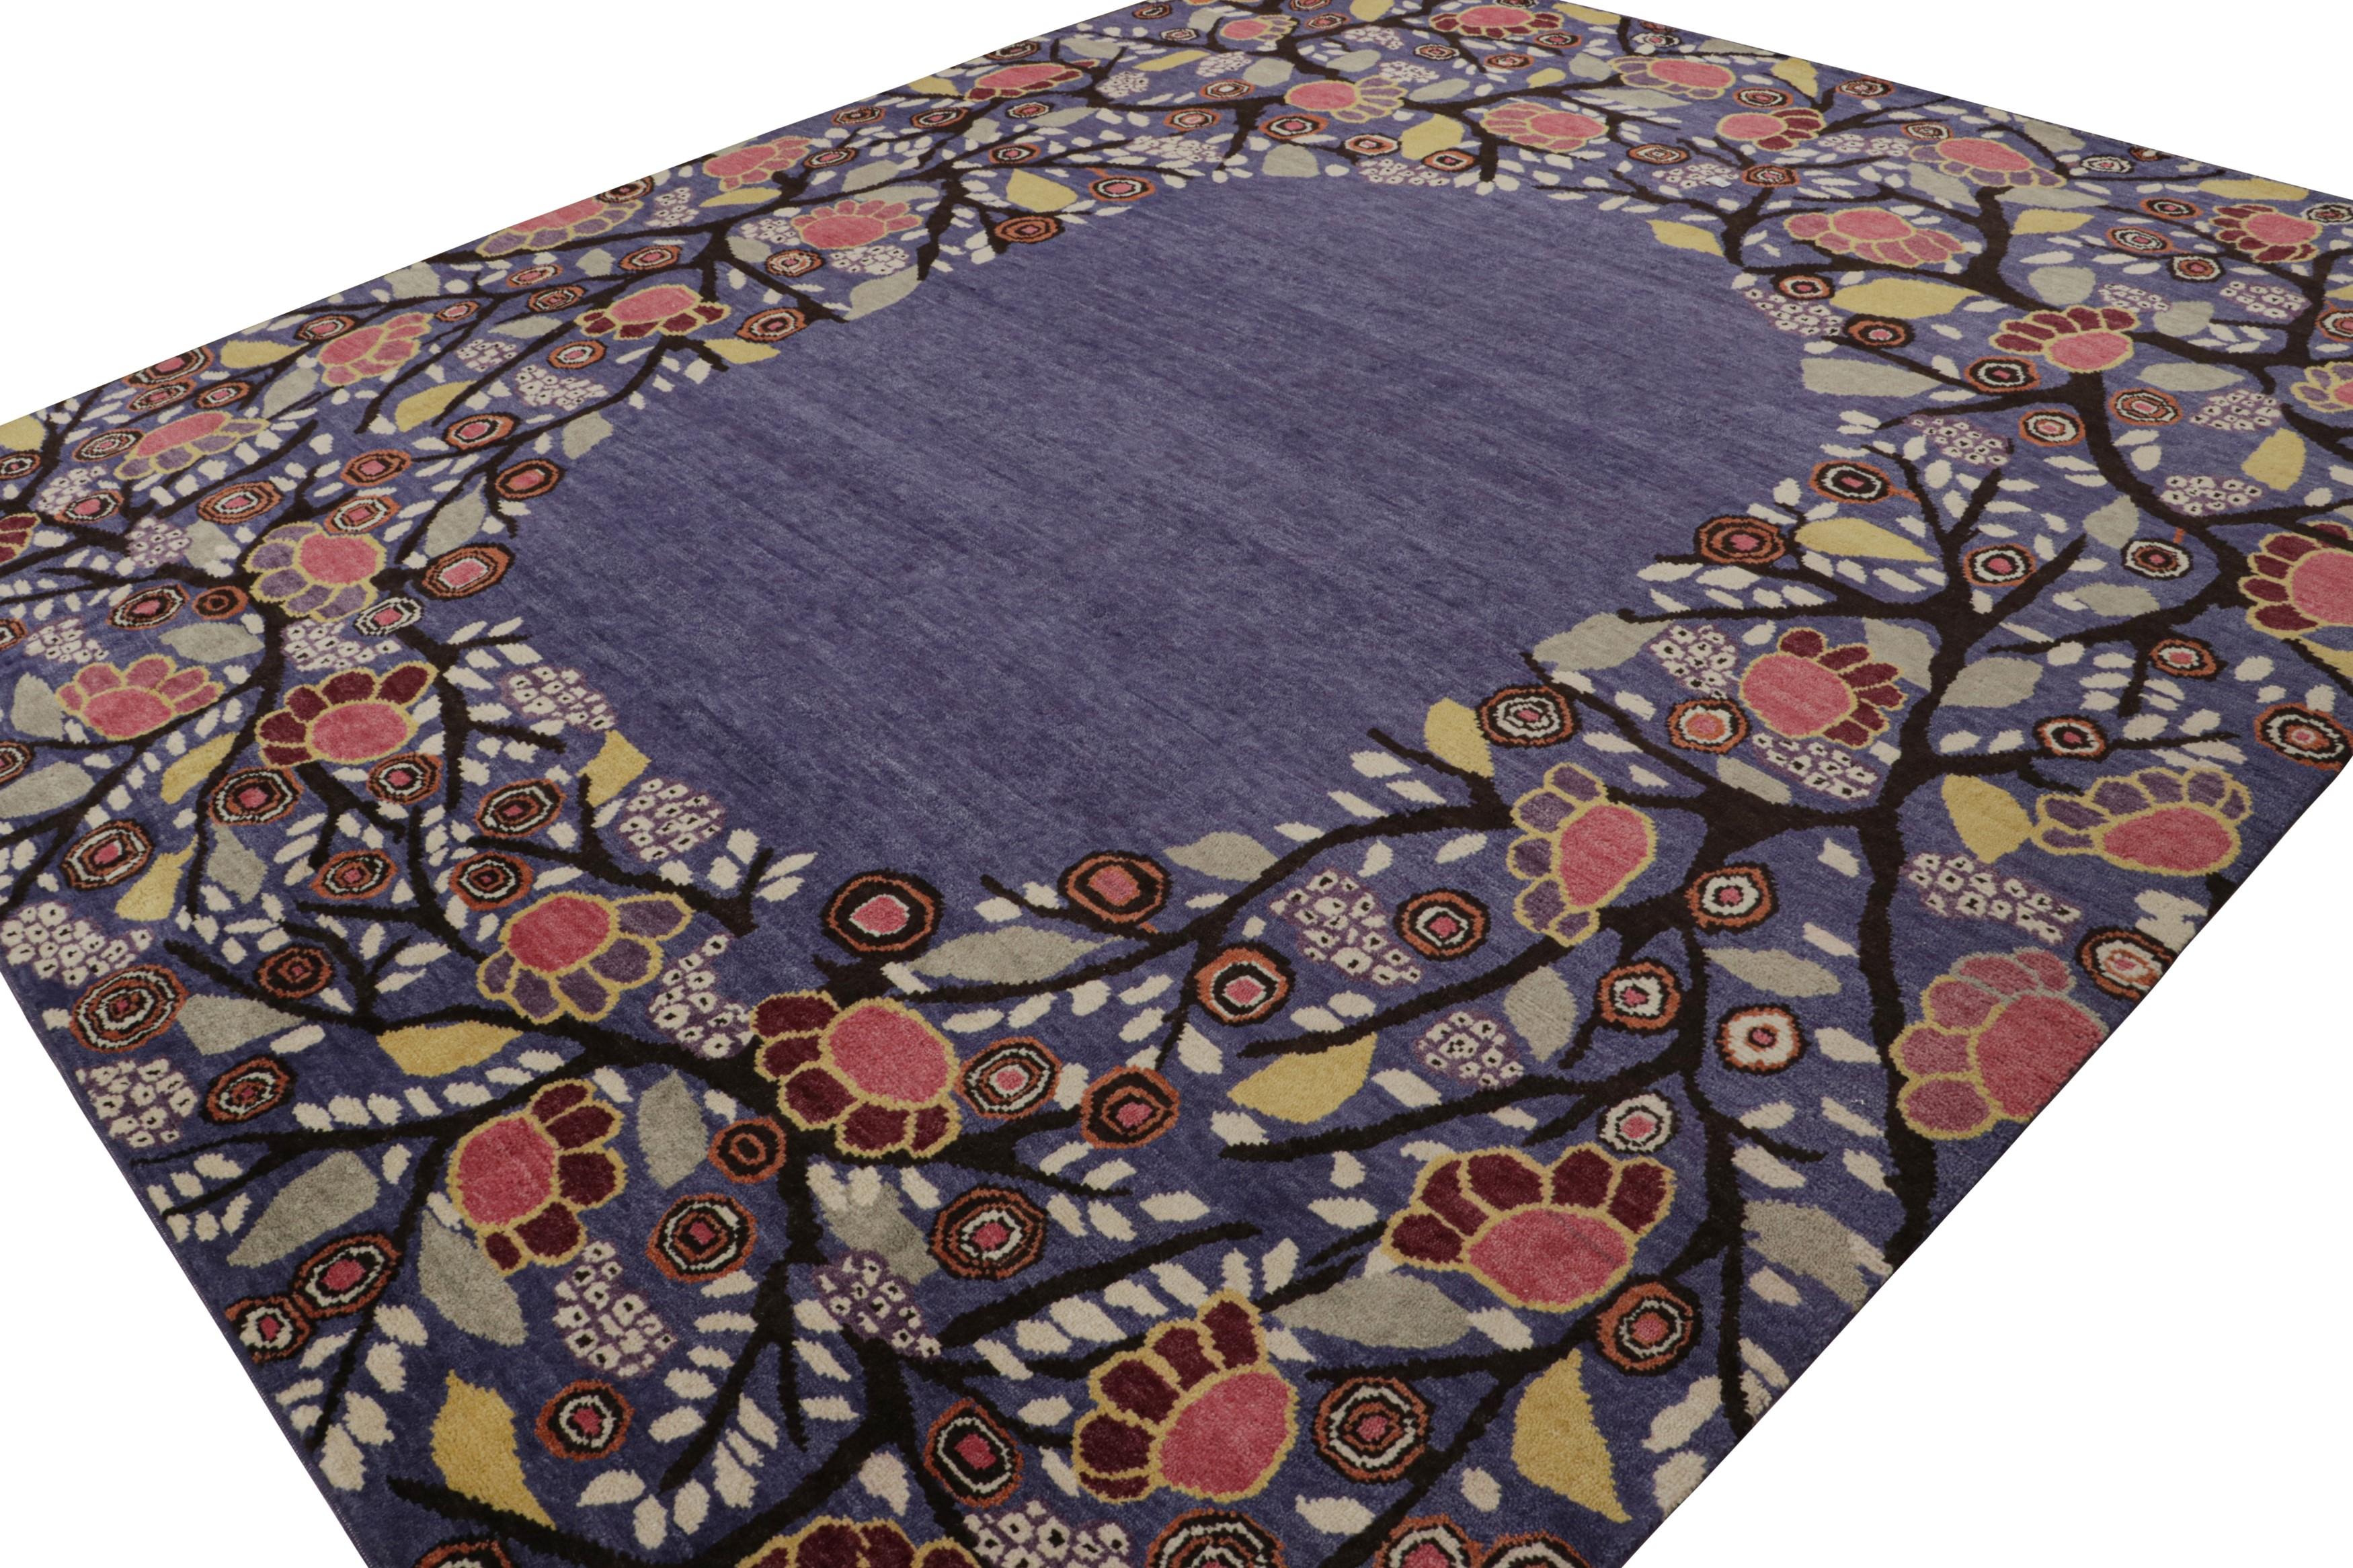 This 11x13 ode to French Art Deco rugs is the next addition to Rug & Kilim’s newly inspired Deco Collection. Hand-knotted in wool.

Further on the Design:  

This piece boasts the Deco style of the 1920s with luscious polychromatic florals on a blue